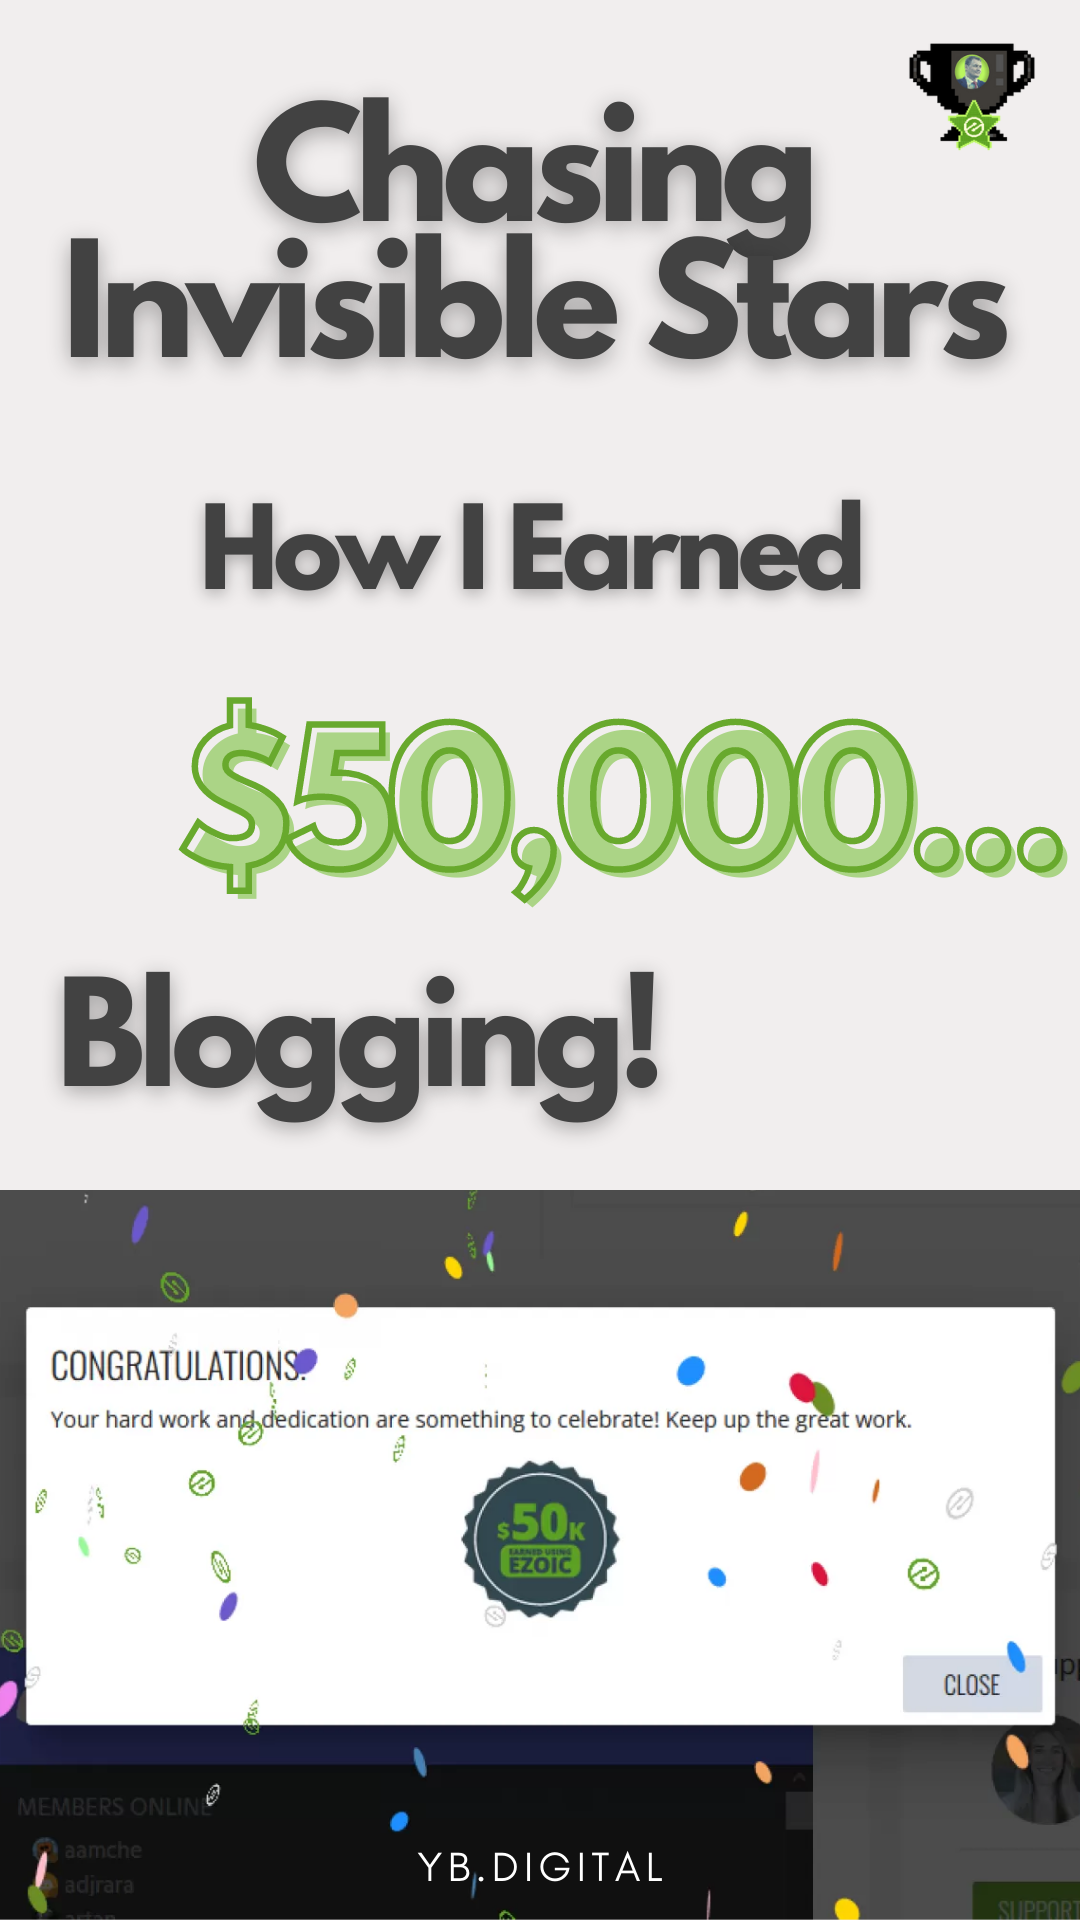 Many people are wondering if it is possible to make money online blogging as this new type of occupation is not a standard job, is highly volatile, but yet can become more rewarding than any other career choice. This is the story of how I managed to earn $50,000 with my blog content and an amazing technology partner!